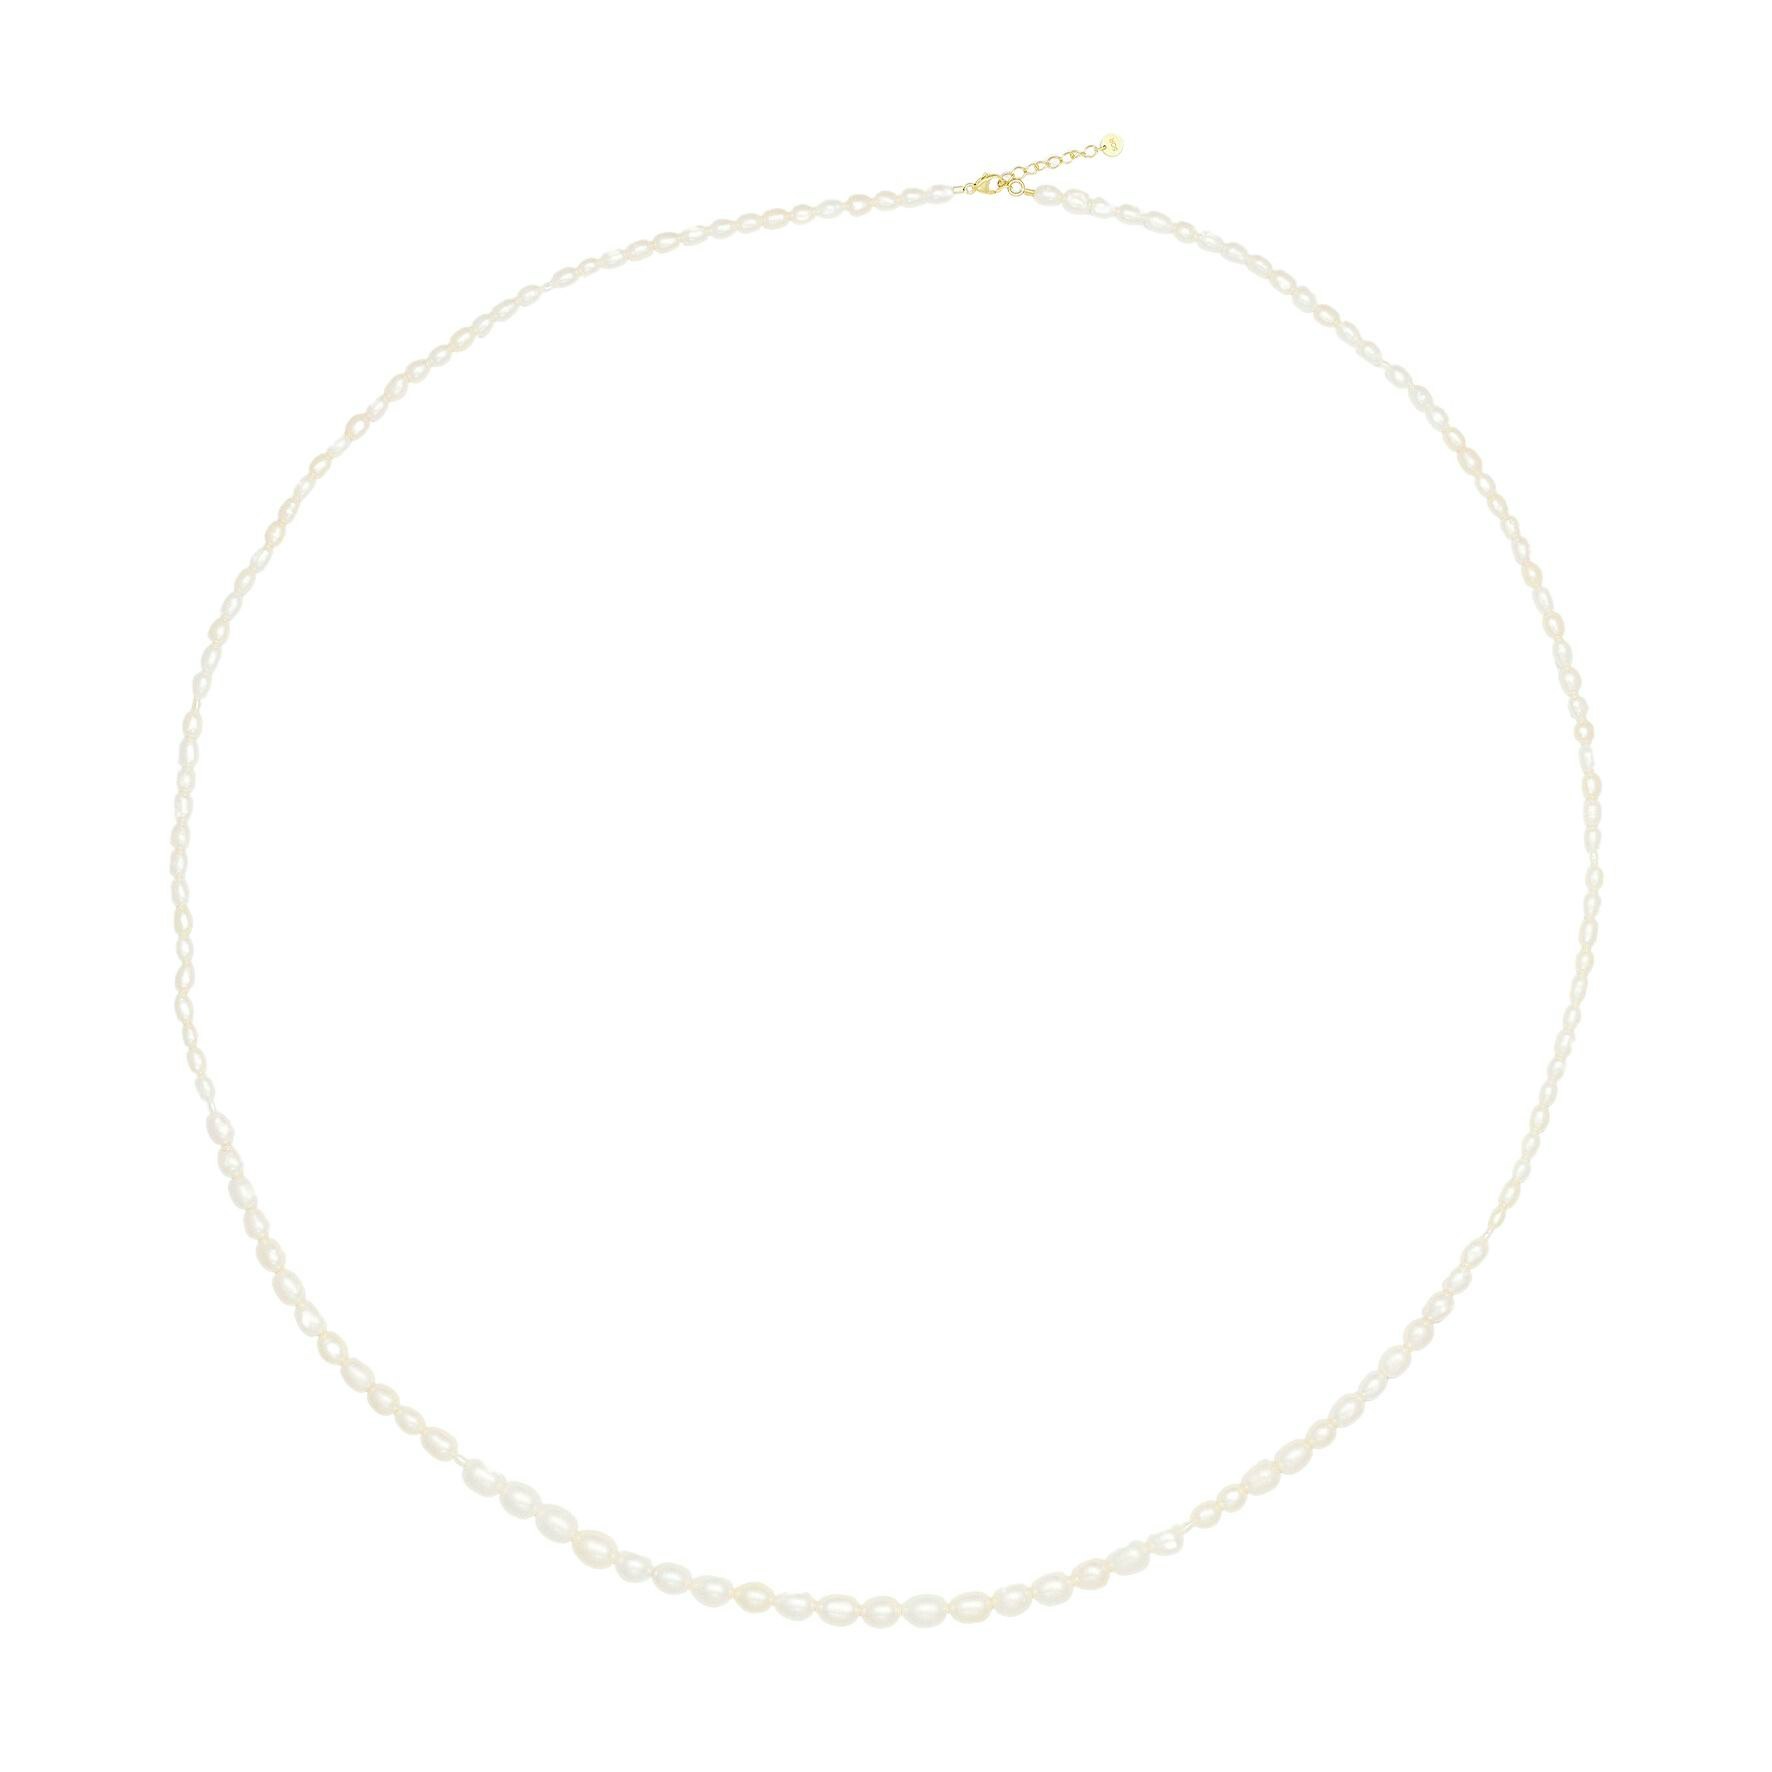 Stormy Necklace from Sorelle Jewellery in Goldplated Silver Sterling 925